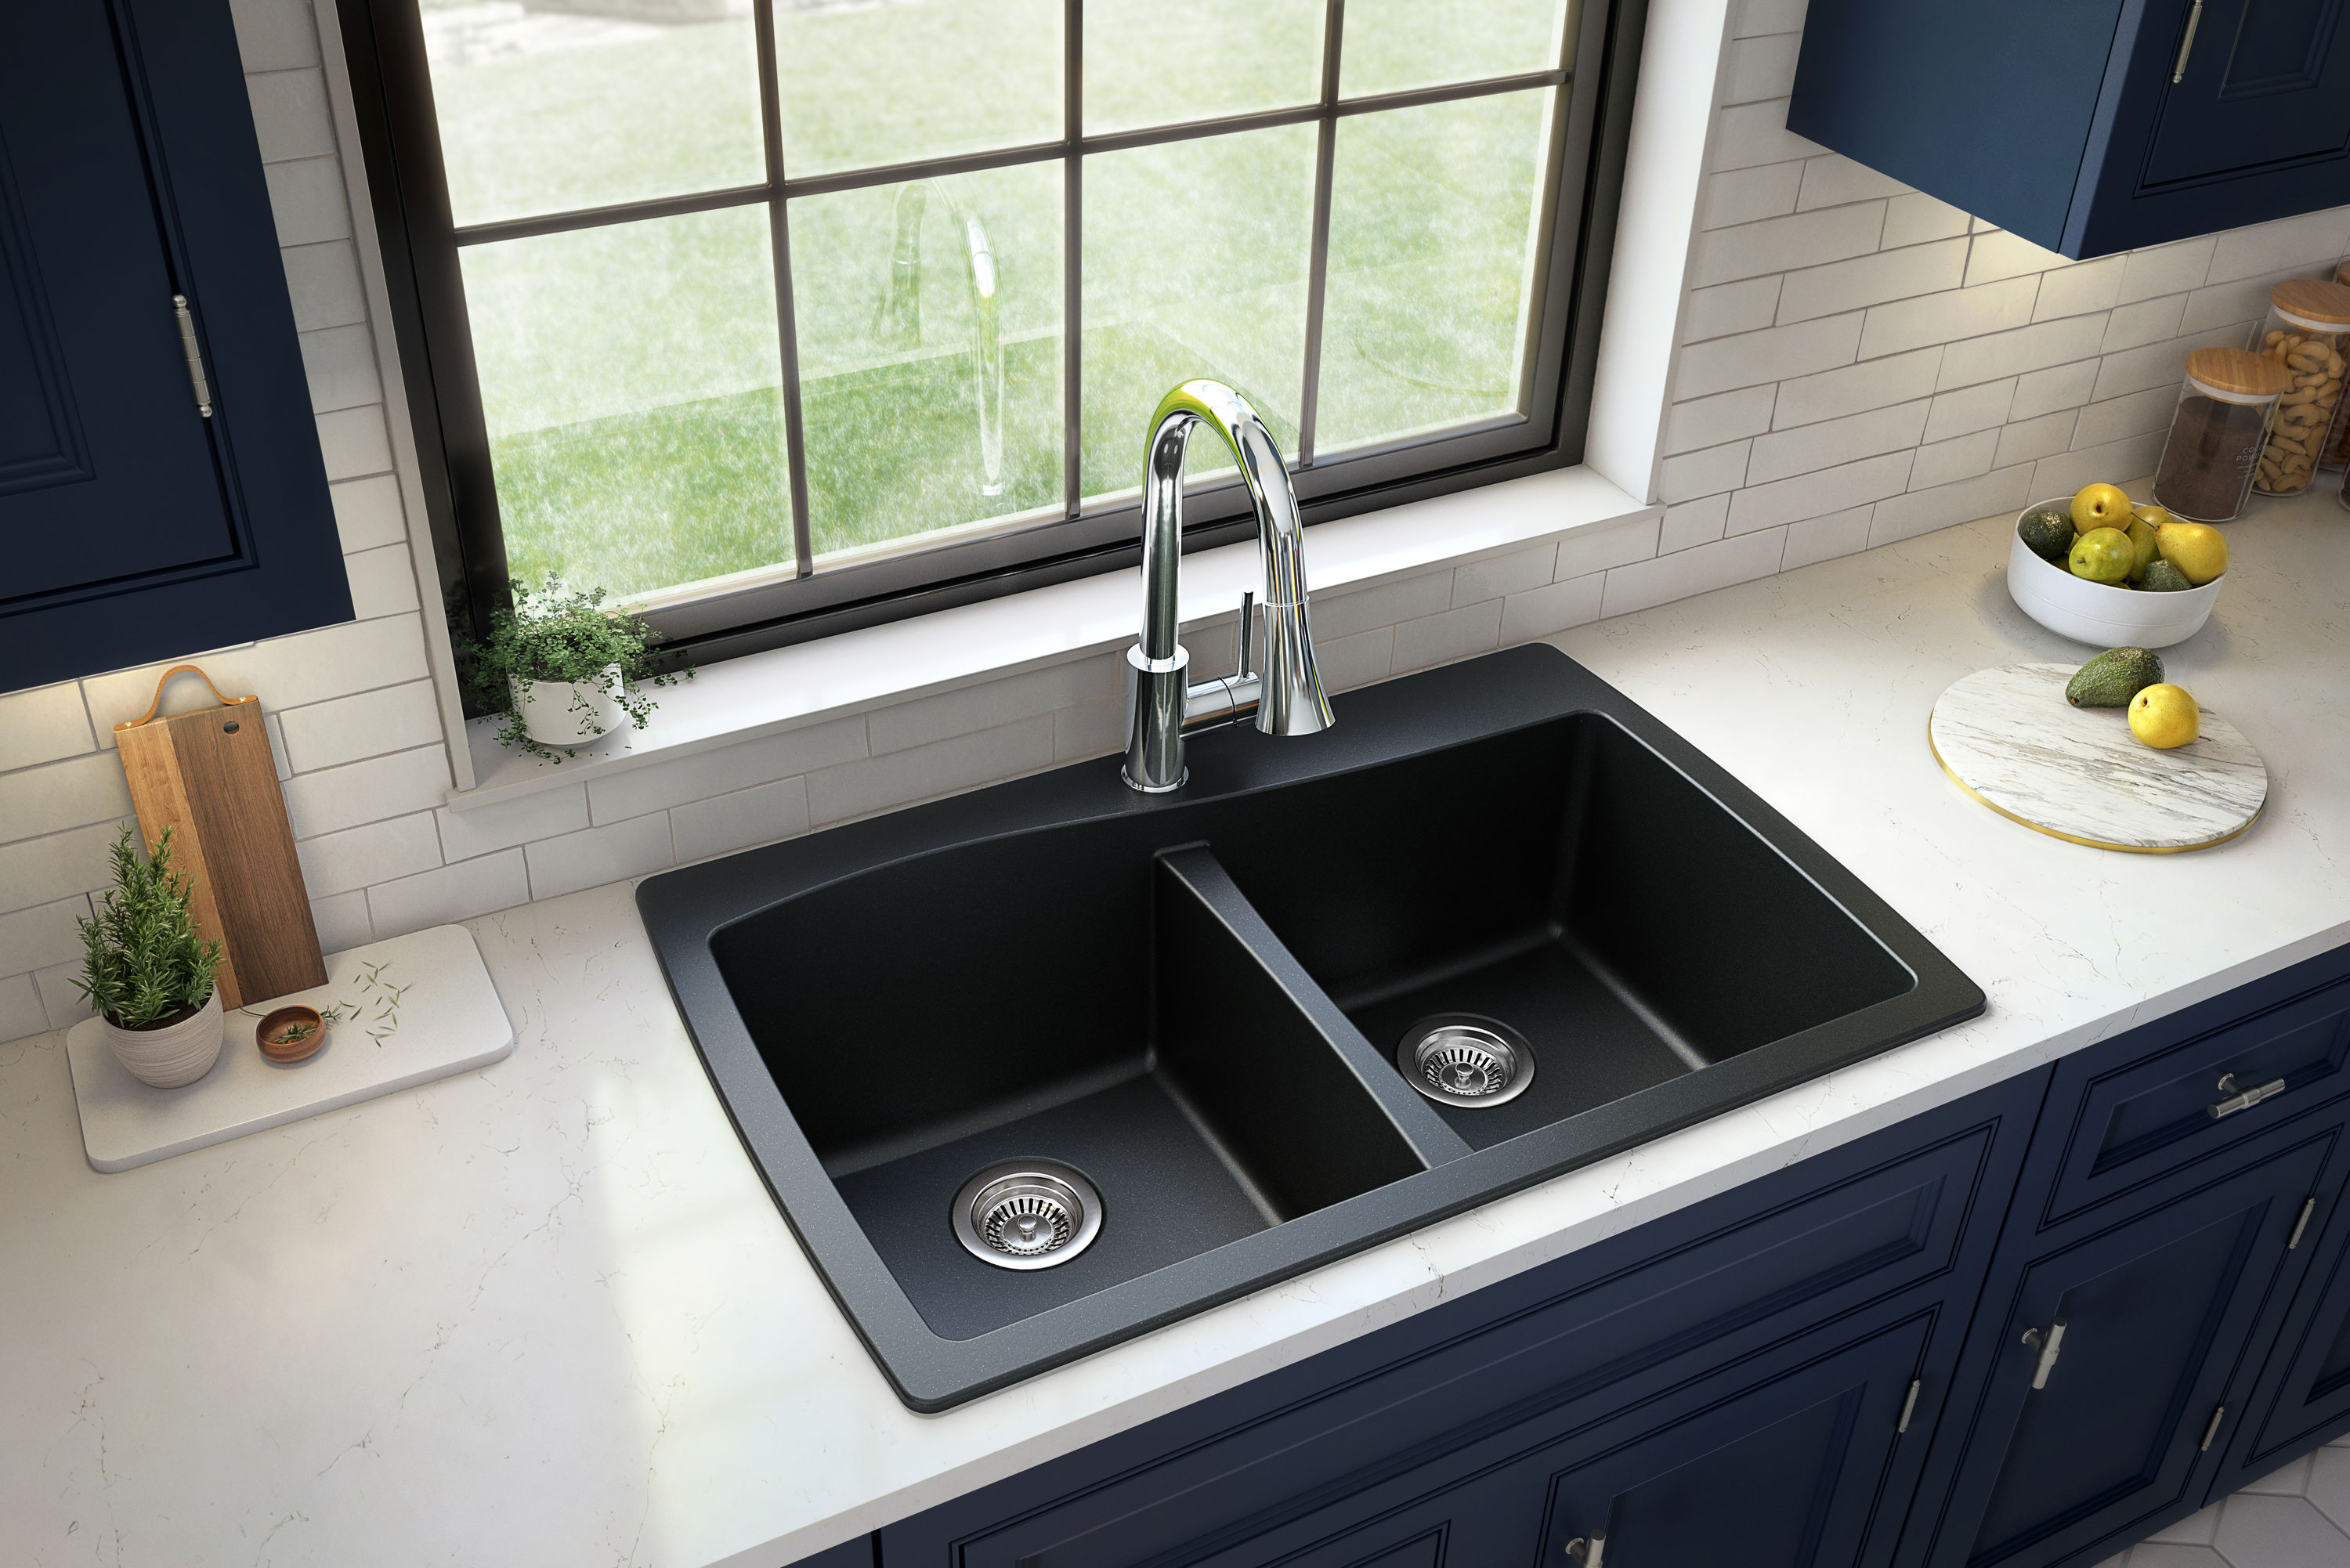 Early Black Friday Deals 2020: Silicone Kitchen Sink